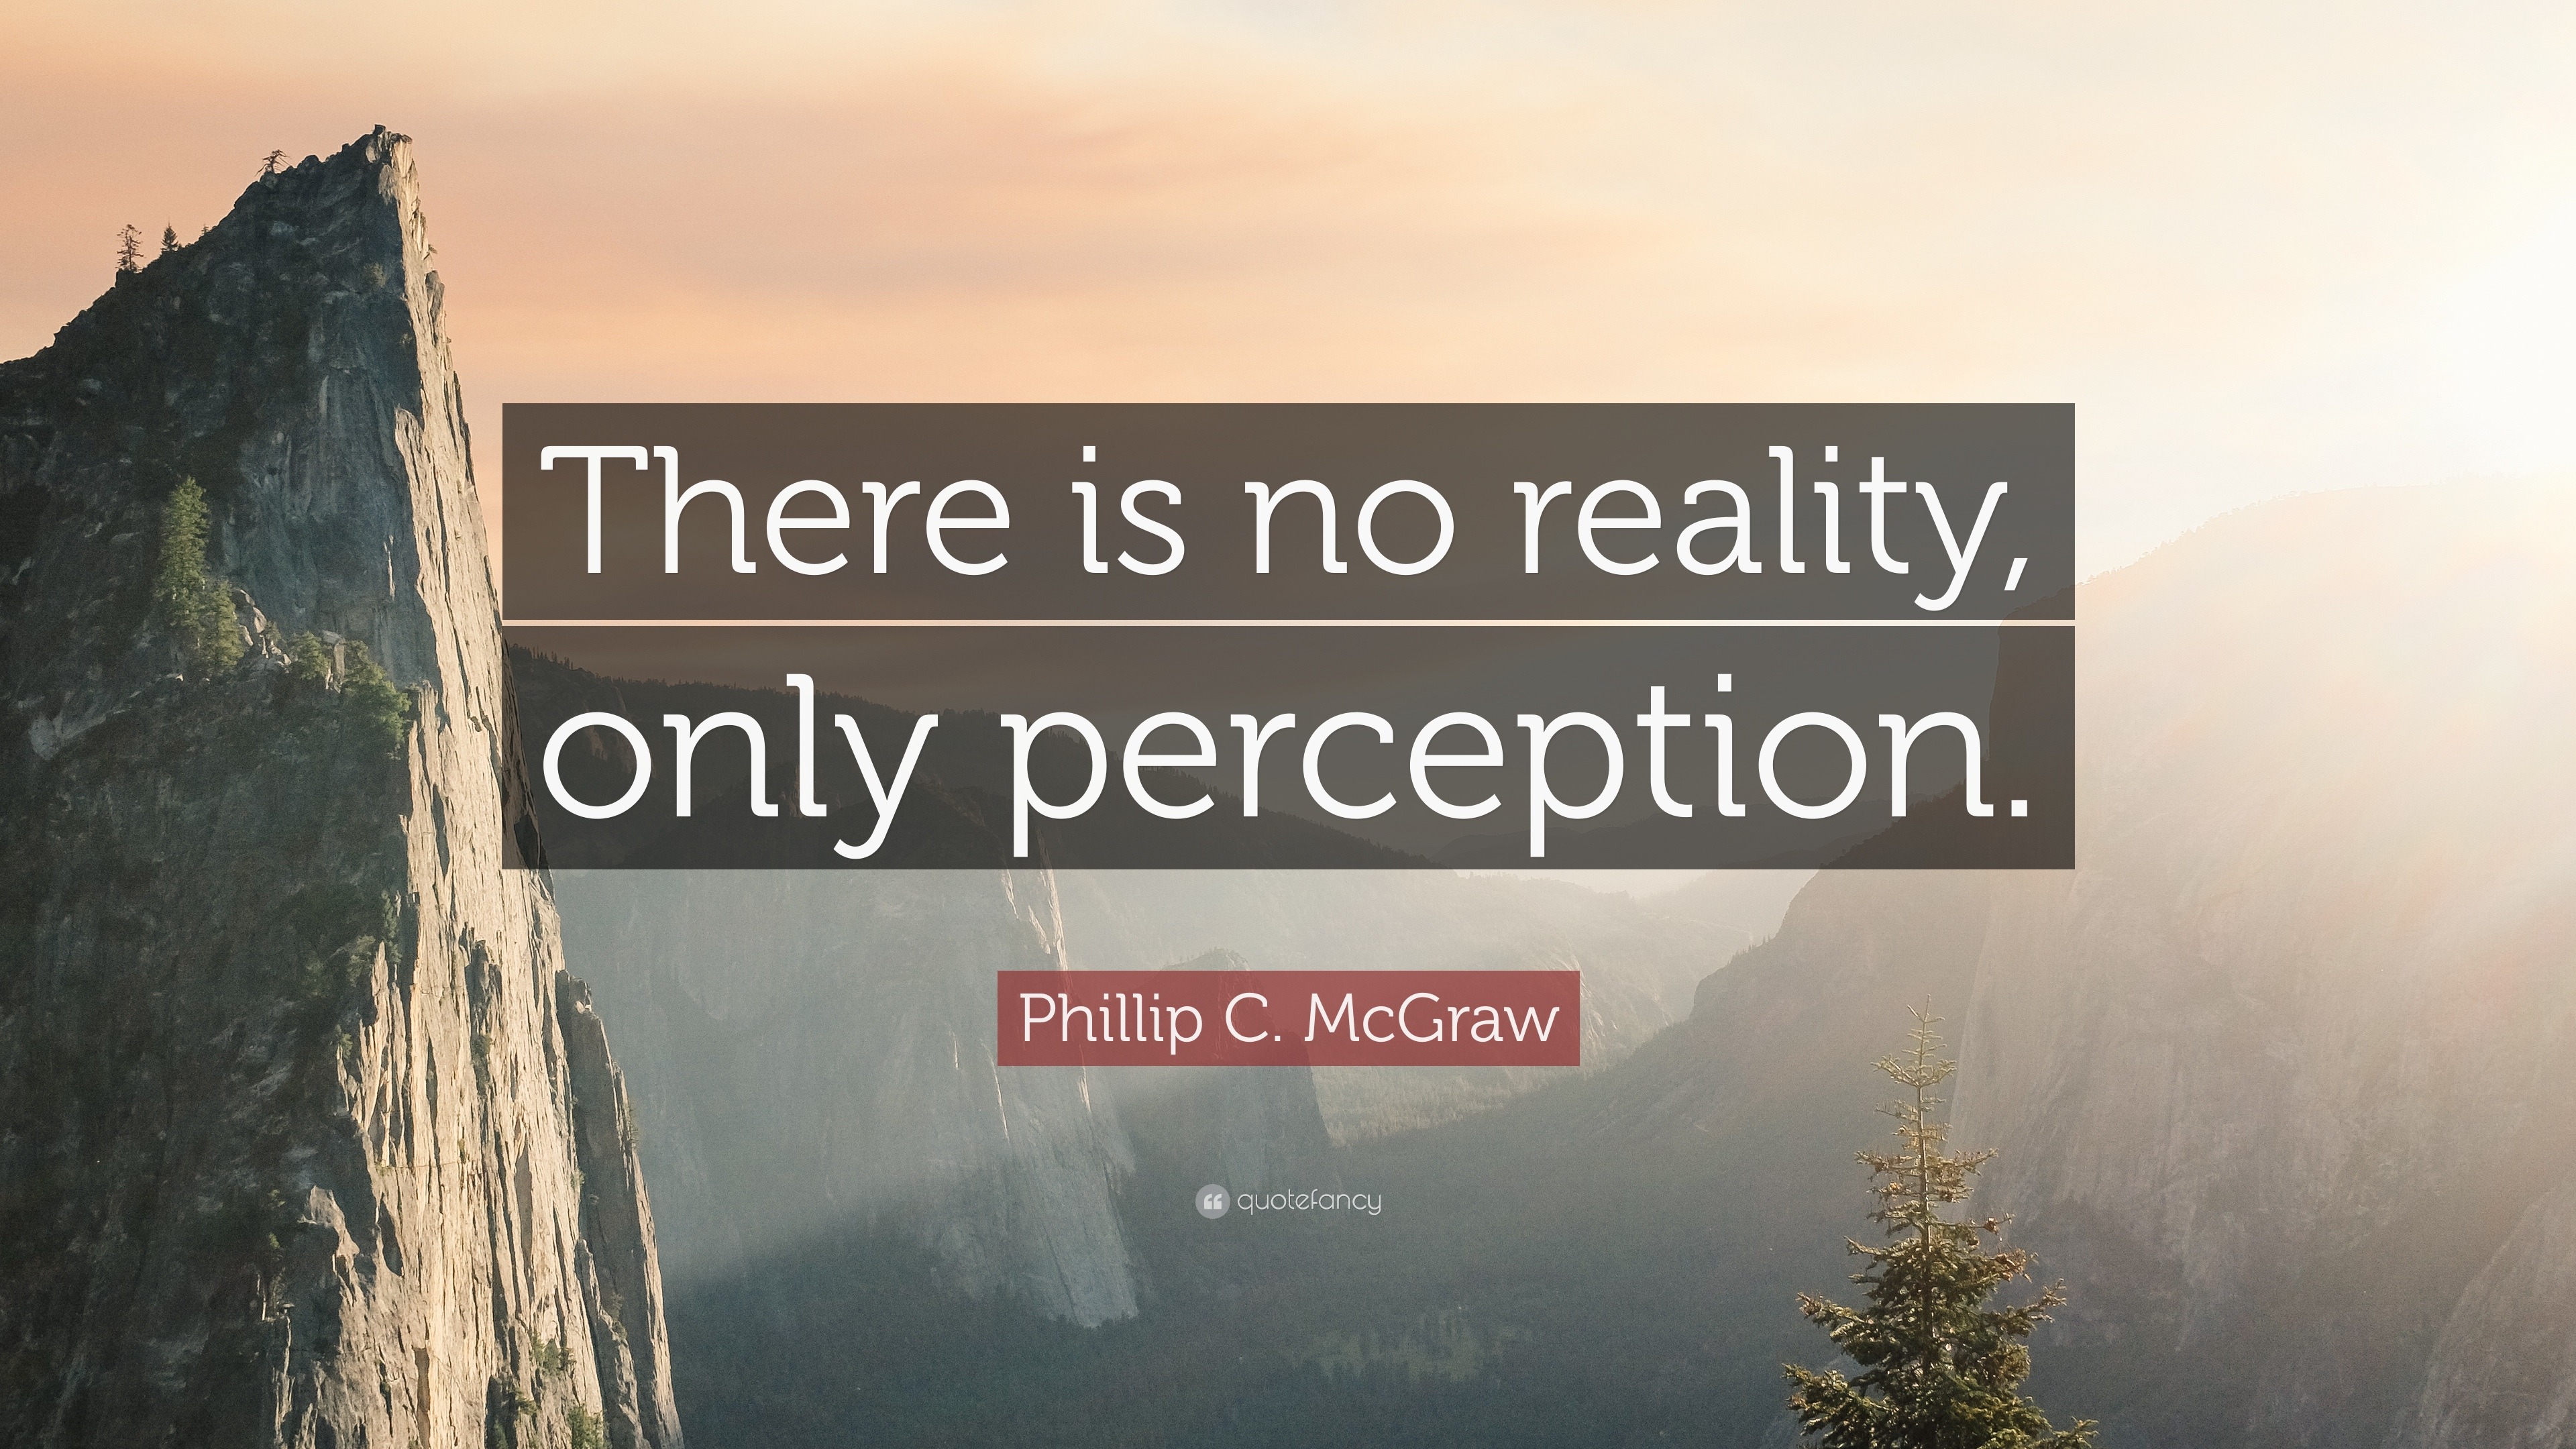 perception is not reality superliminal